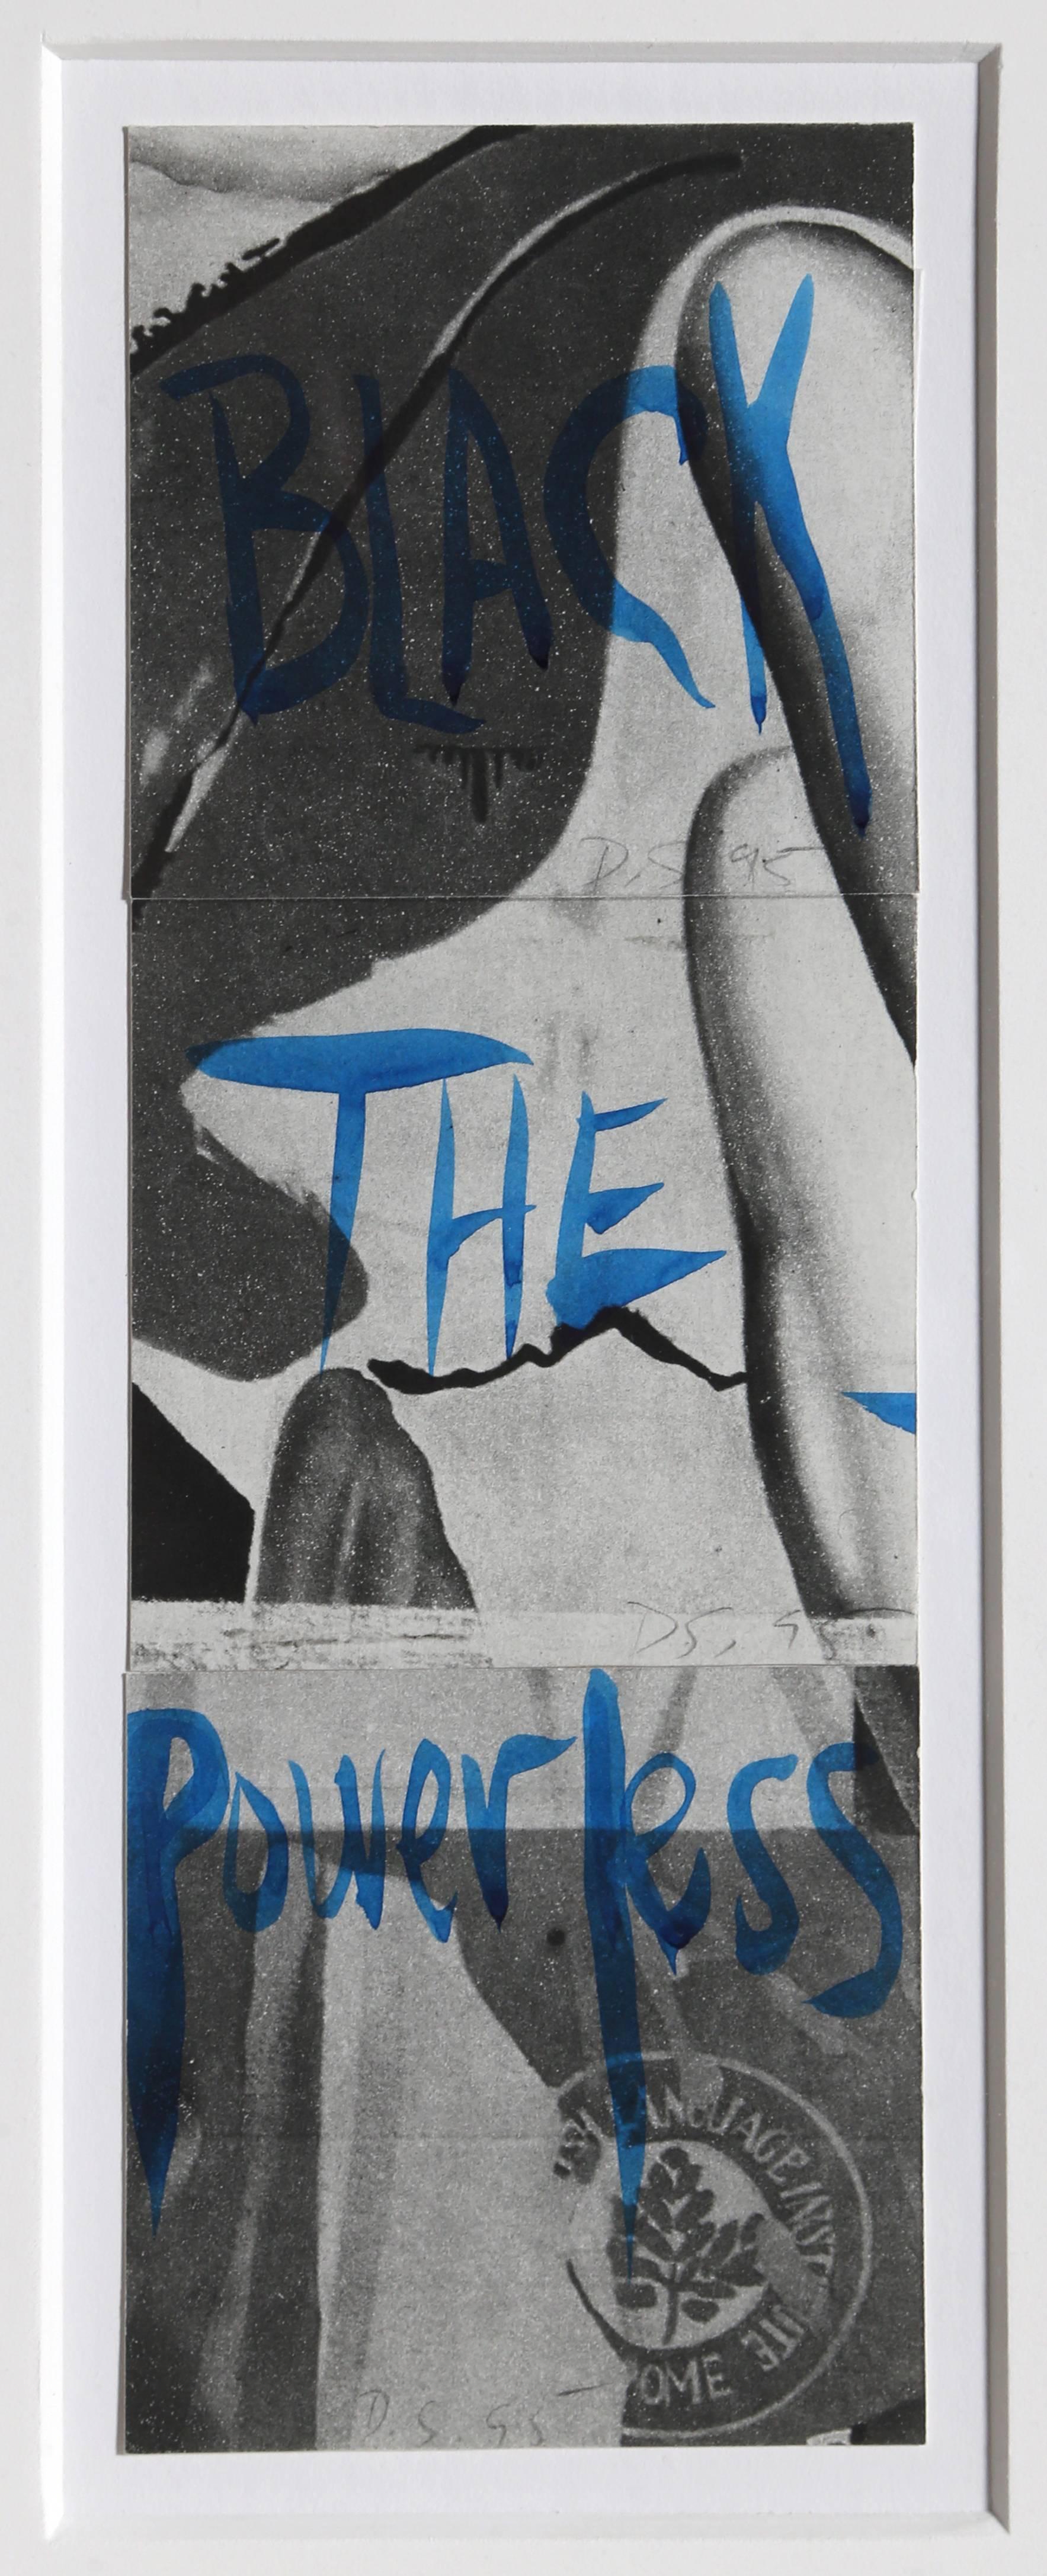 David Salle Abstract Print - Black the Powerless, Hand-Colored Triptych 1995